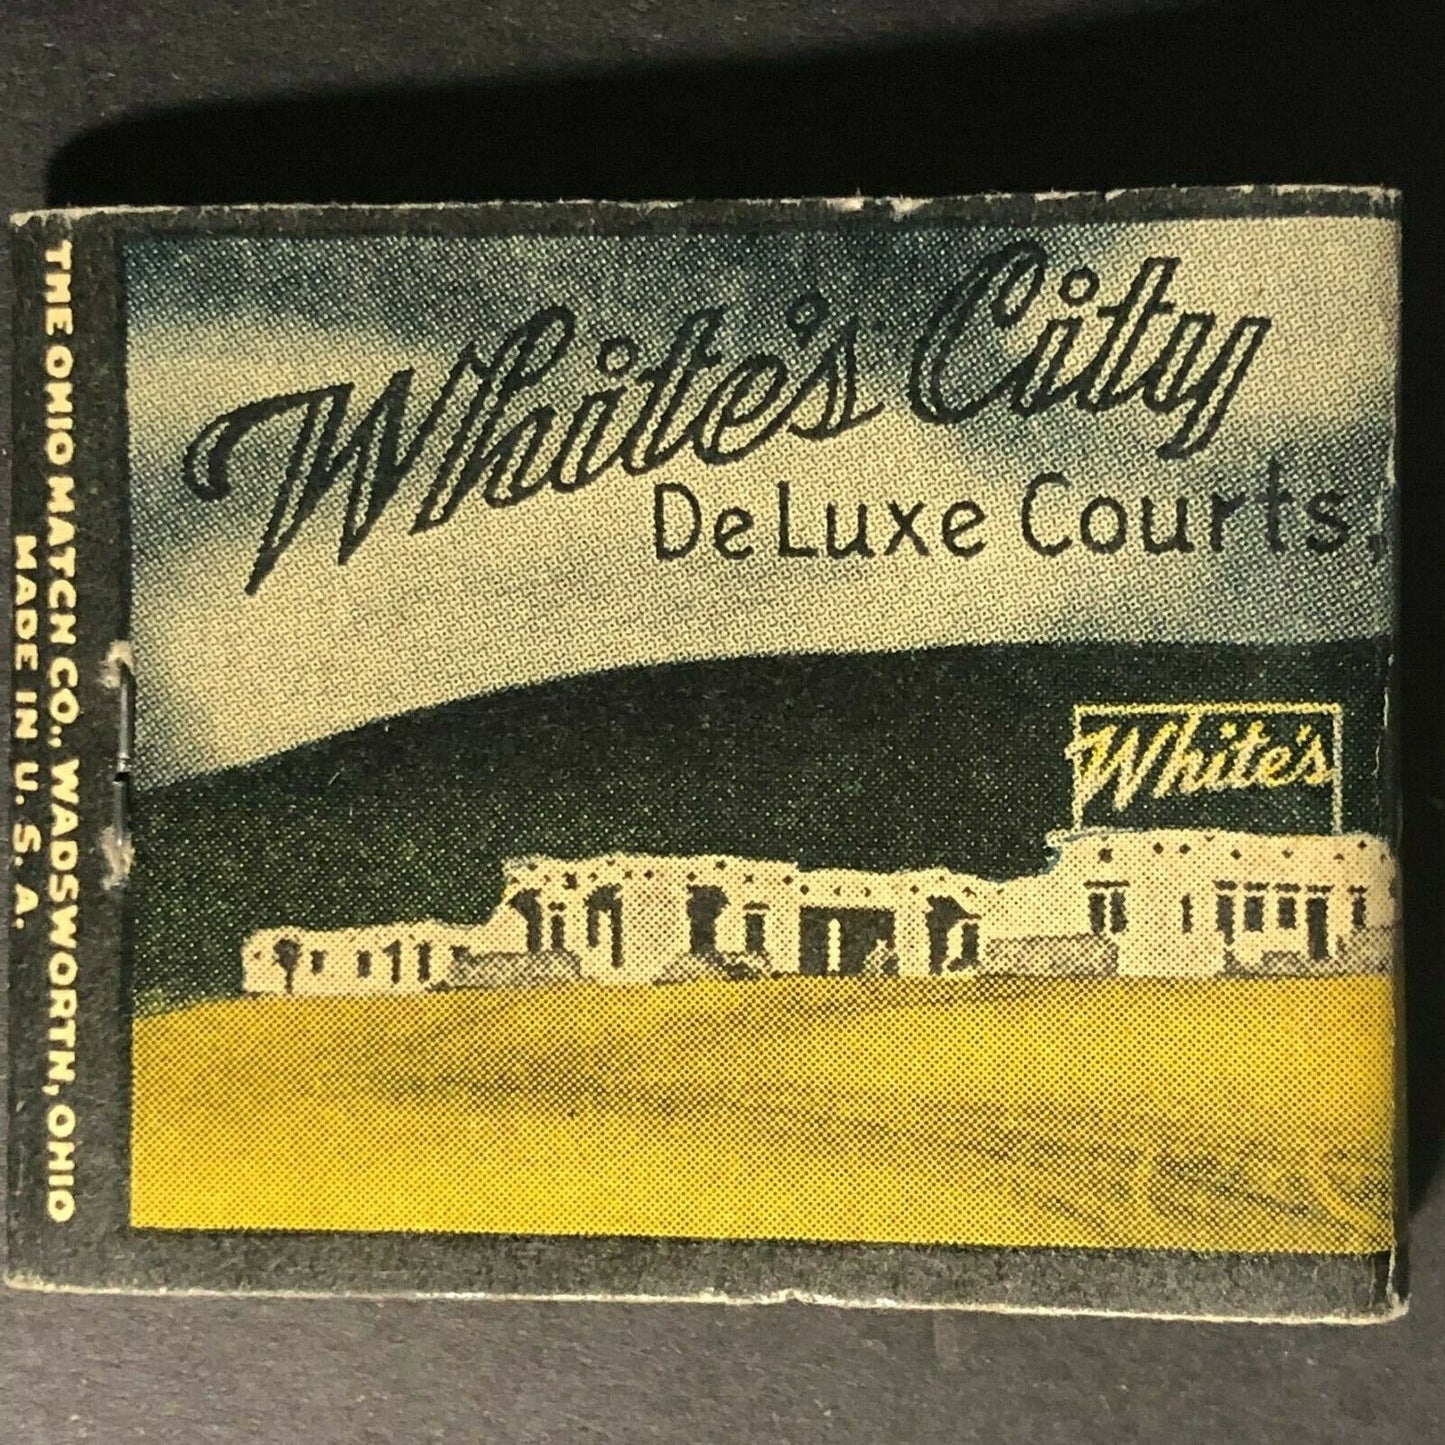 Vintage c1940's-50's Full Matchbook - White's City DeLuxe Courts, NM